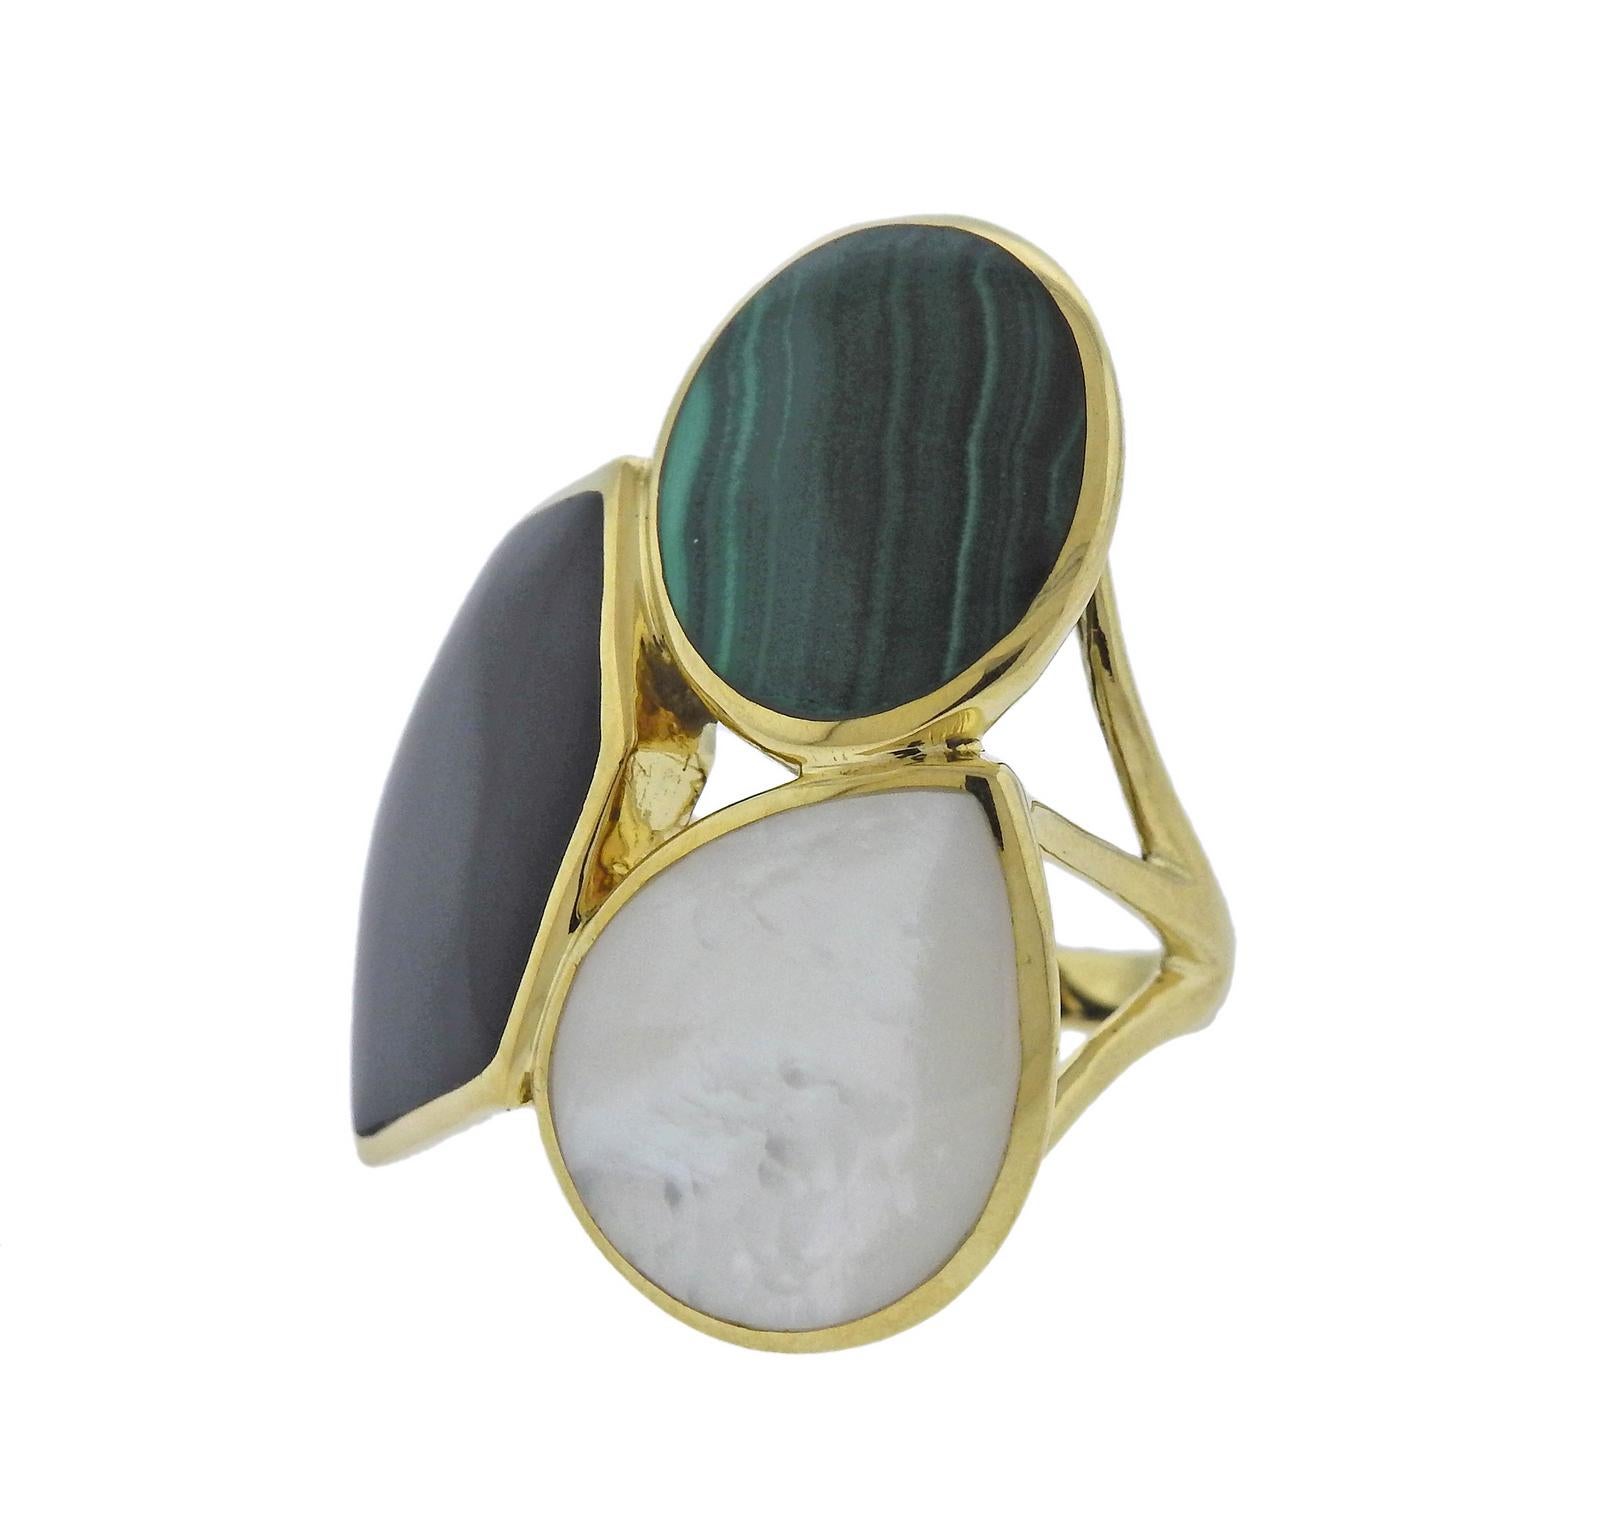 18k gold gemstone ring by Ippolita, set with malachite, onyx and mother of pearl. Ring size - 7 3/4, ring top is 35mm x 33mm , weighs 13.9 grams. Marked Ippolita and 18k. Retail $3995. Comes with Pouch.